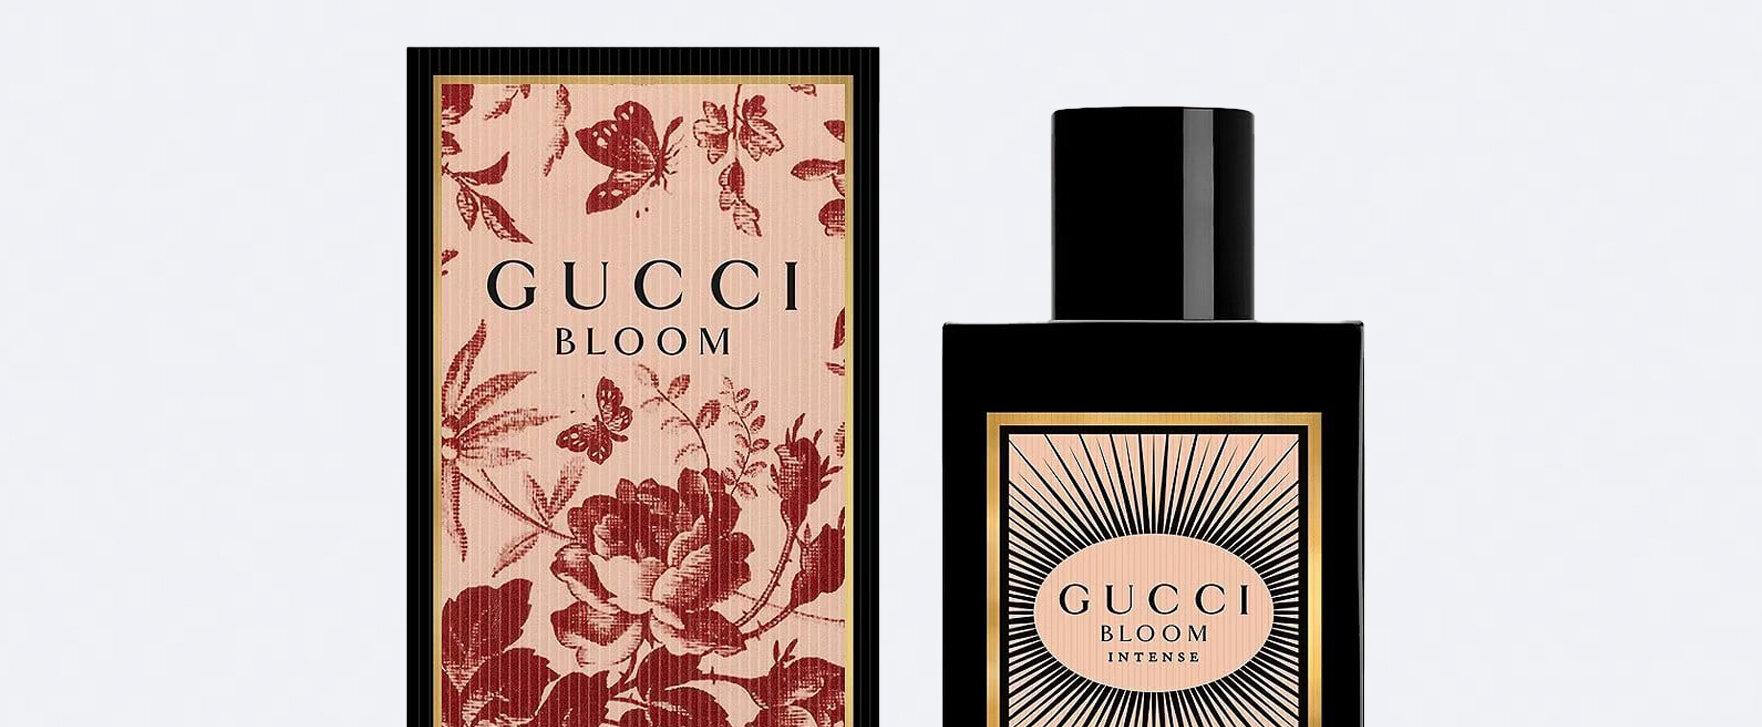 “Gucci Bloom Intense”: The Intensified Version of the Popular Perfume “Bloom” by Gucci 